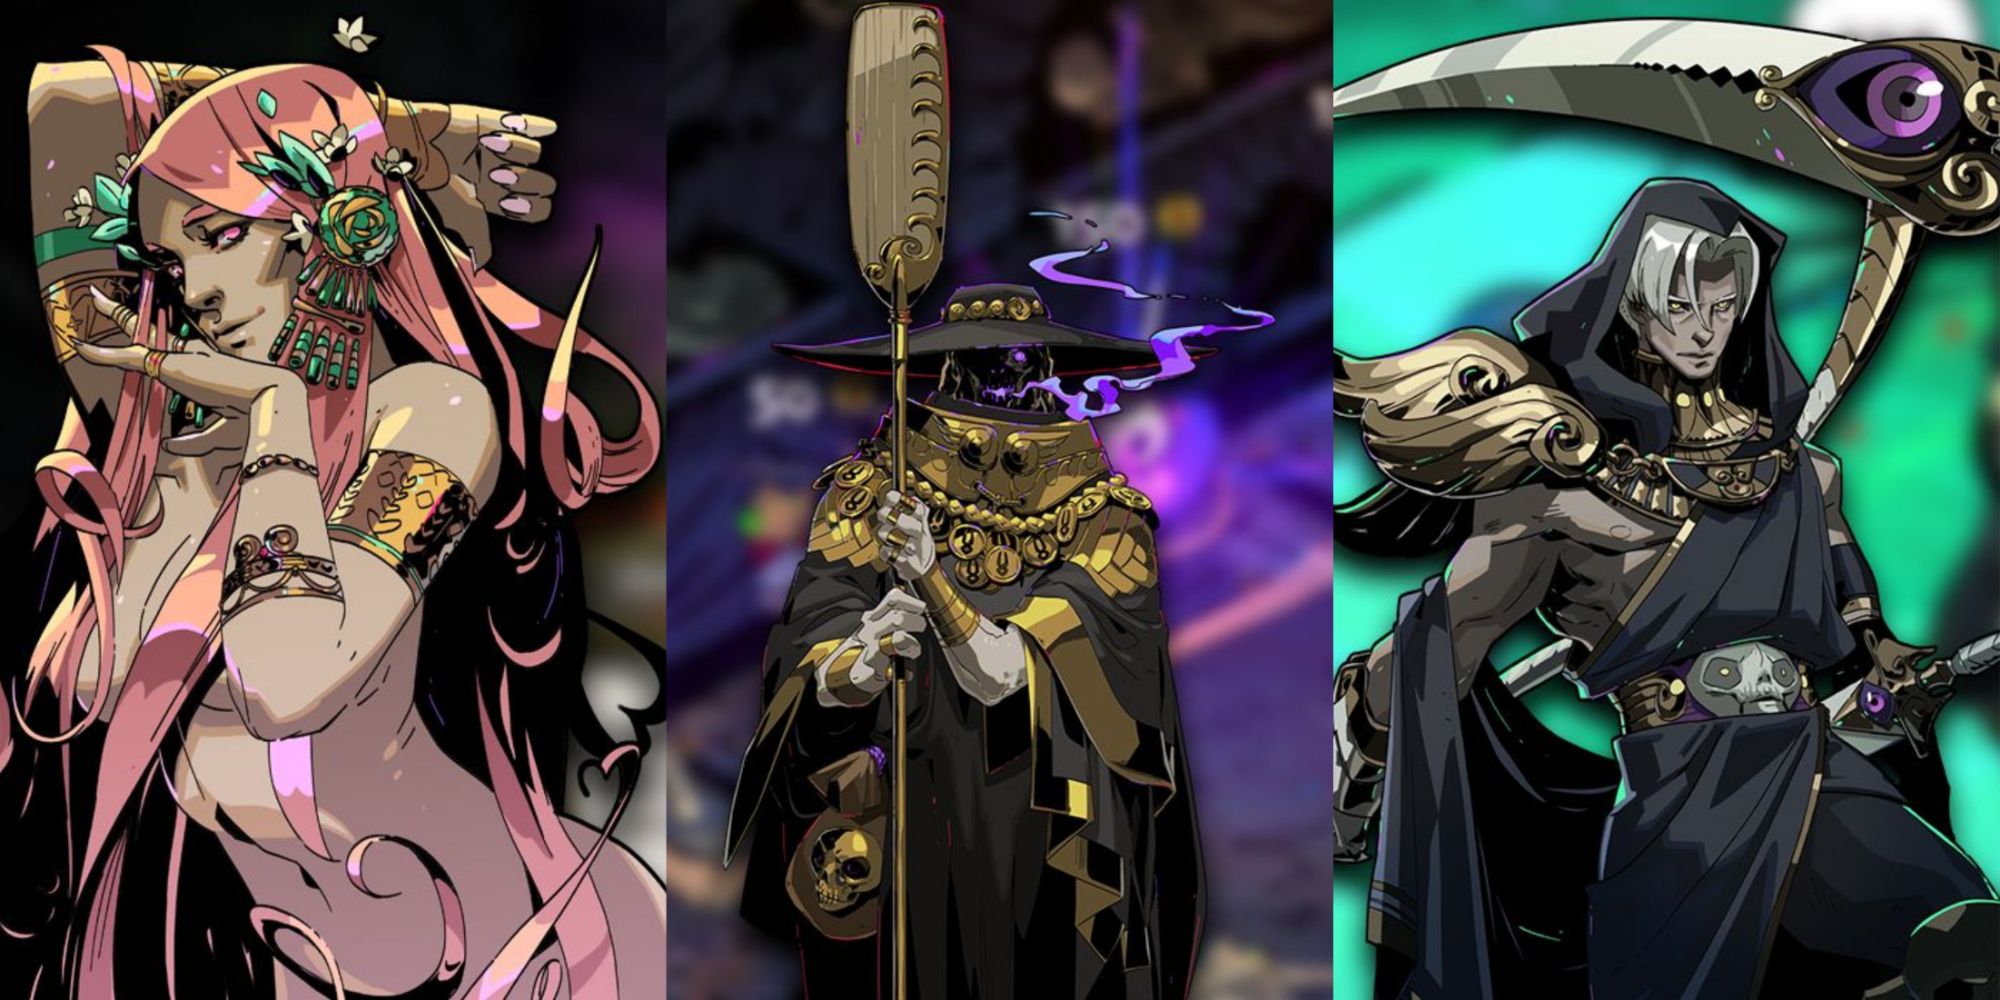 In-game portraits of Aphrodite, Charon, and Thanatos, left to right